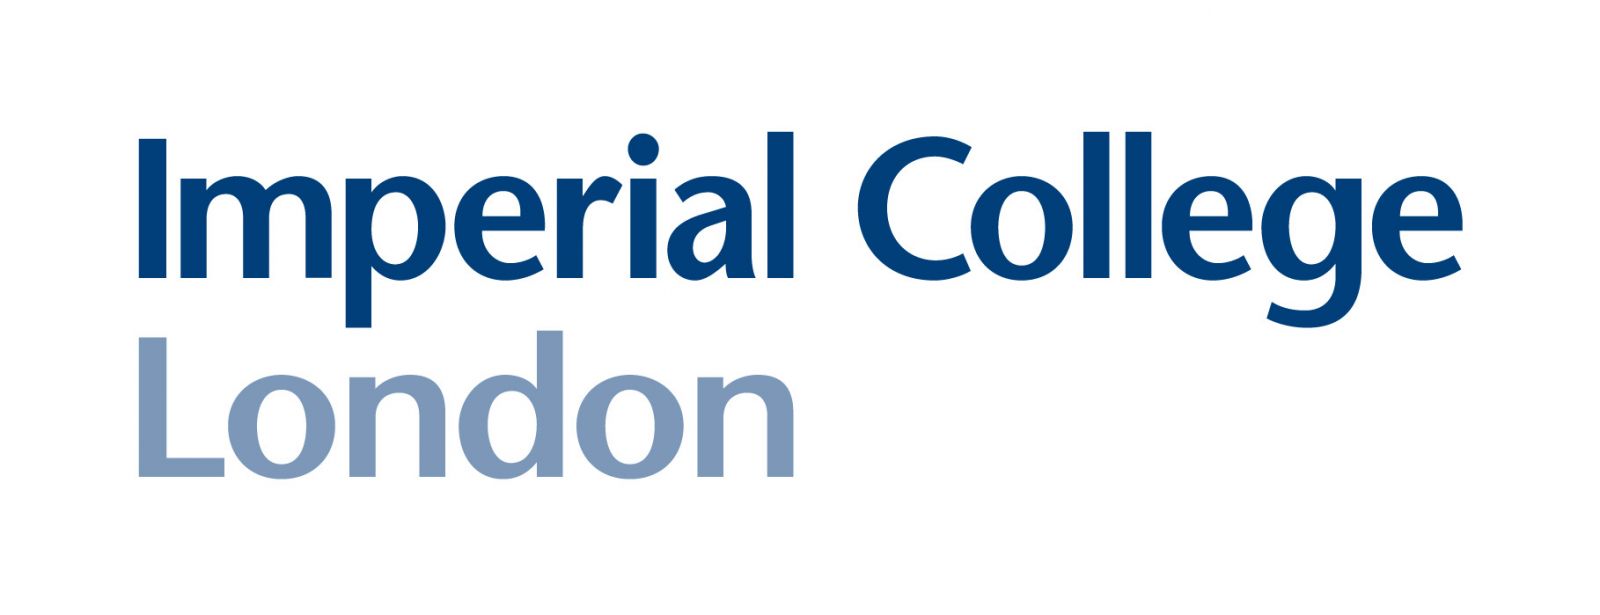 TVF awards a grant of £5,000 to Imperial College London to support medical students 